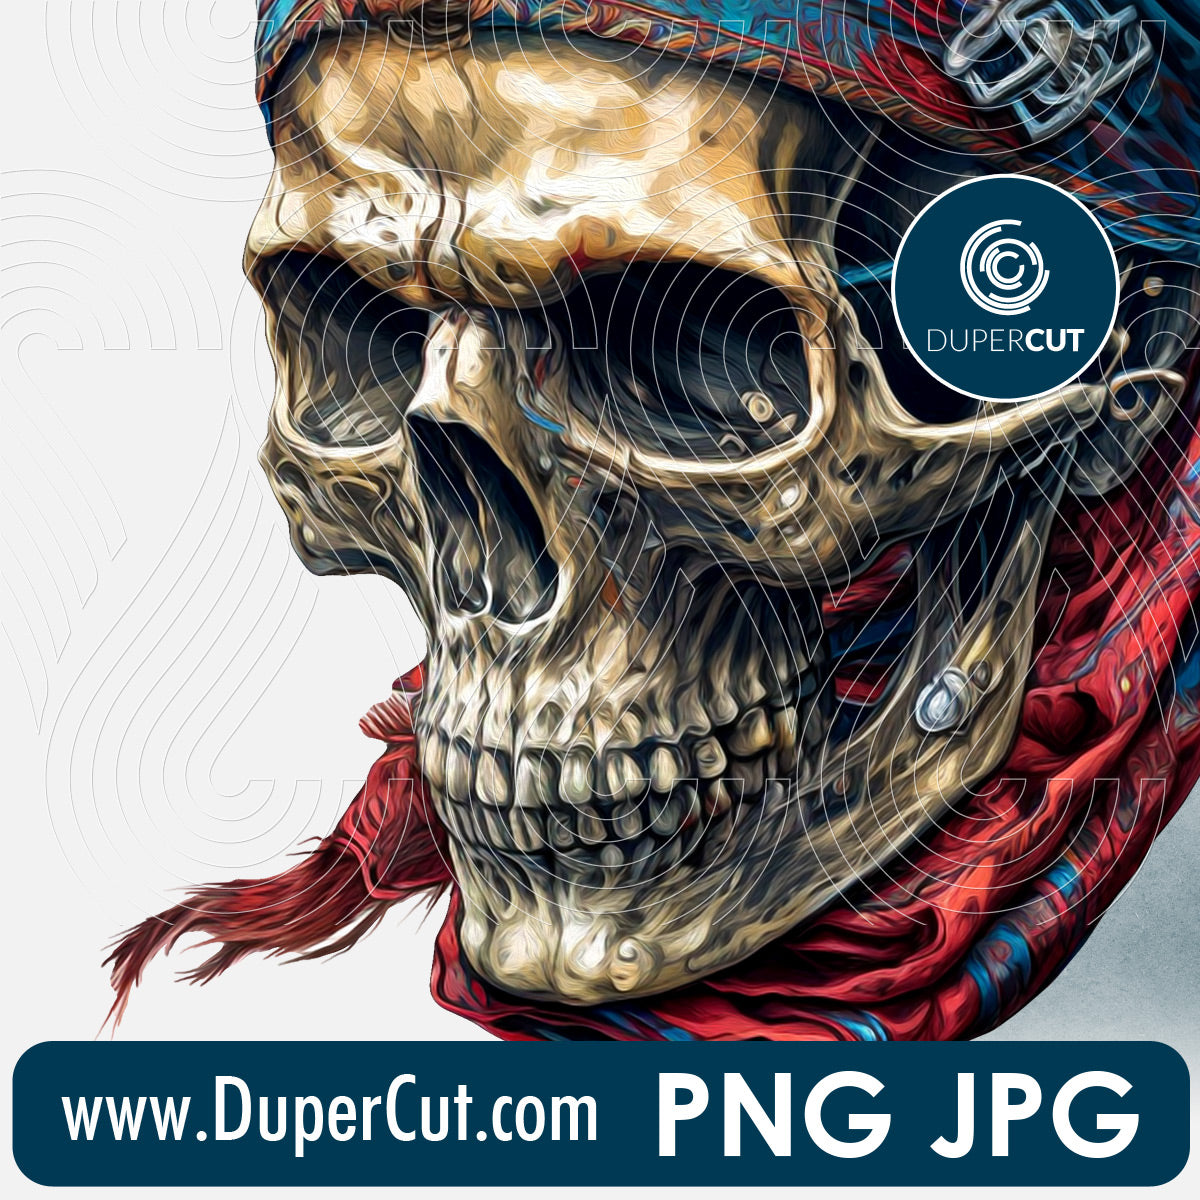 Skull in bandana - full color files for sublimation, print on demand, high resolution PNG JPG template transparent background by www.dupercut.com